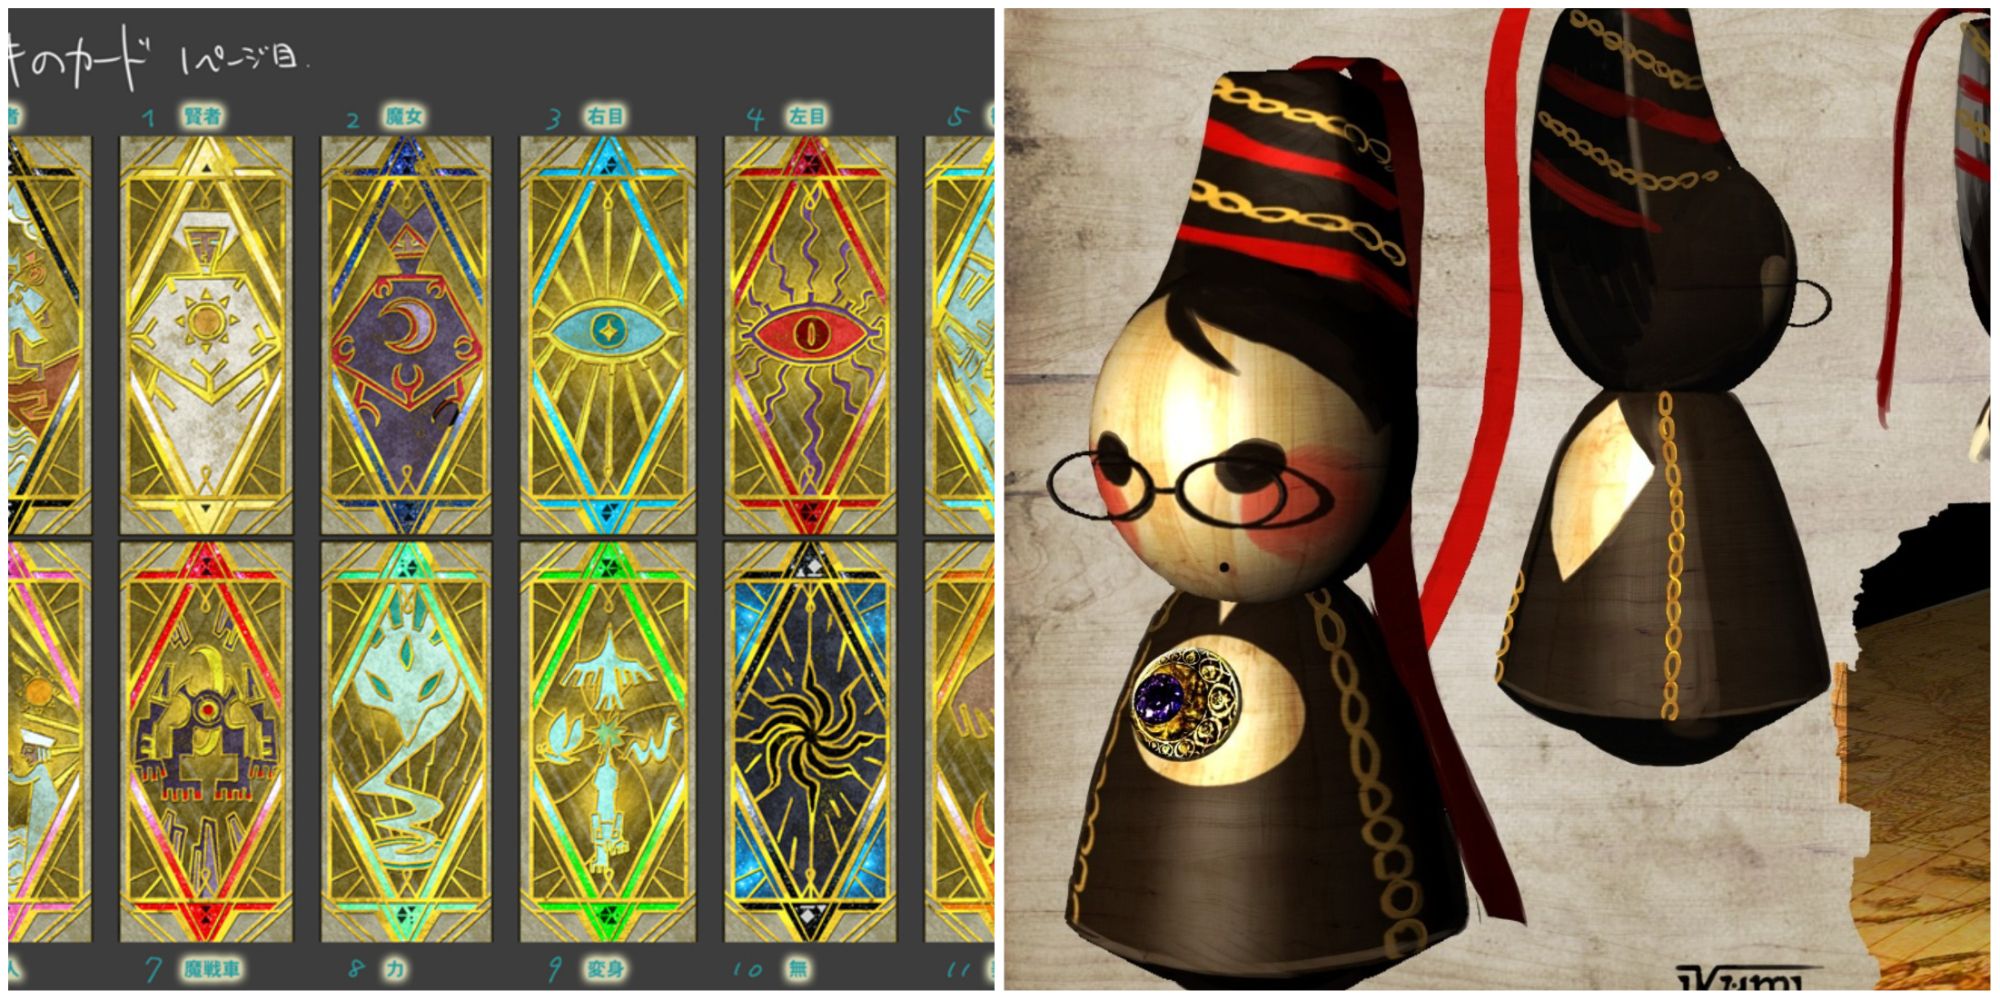 Offical artwork or the tarot cards from Bayonetta 2, and official artwork of the Bayonetta wooden doll from Bayonetta